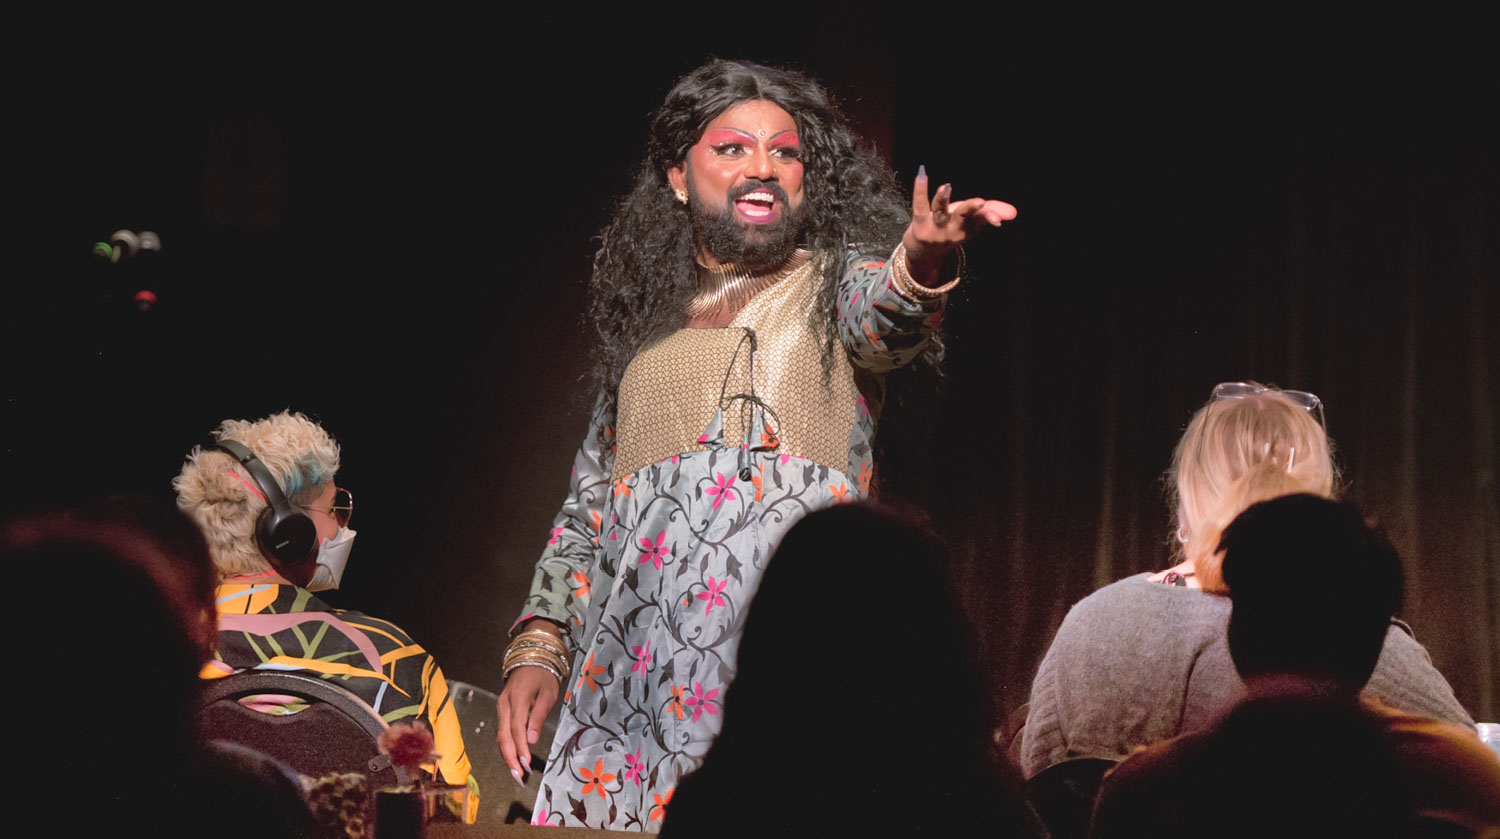 Image of deep-toned drag artist performing before an audience. The artist has long black hair and a beard. They are wearing bright pink eye shadow and decorative jewels around their face. The artist is outfitted in a brightly coloured dress with flowers embroidered on it. The top of the dress features ornate gold detailing. The artist smiles and reaches their hand out to the audience. Audience members can be seen sitting on chairs from behind, experiencing the performance. An audience member to the left has short hair with coloured streaks in it, and wears a vibrant patterned t-shirt with headphones atop their head.